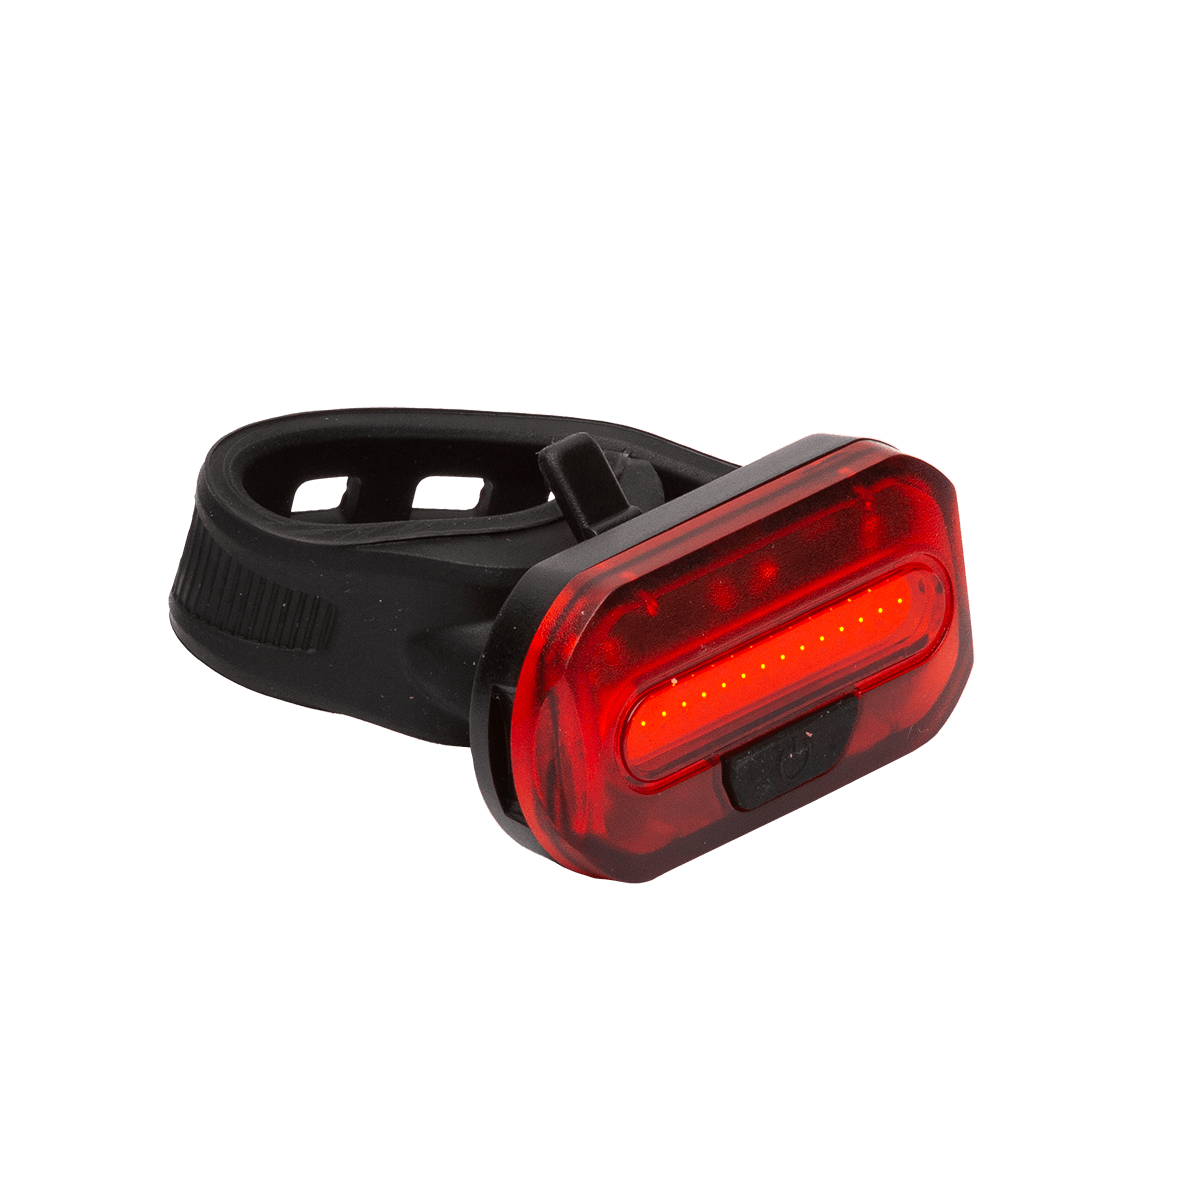 Buy Firefox Bicycle LED Light Rear With battery Bike Accessories Online for Best Price